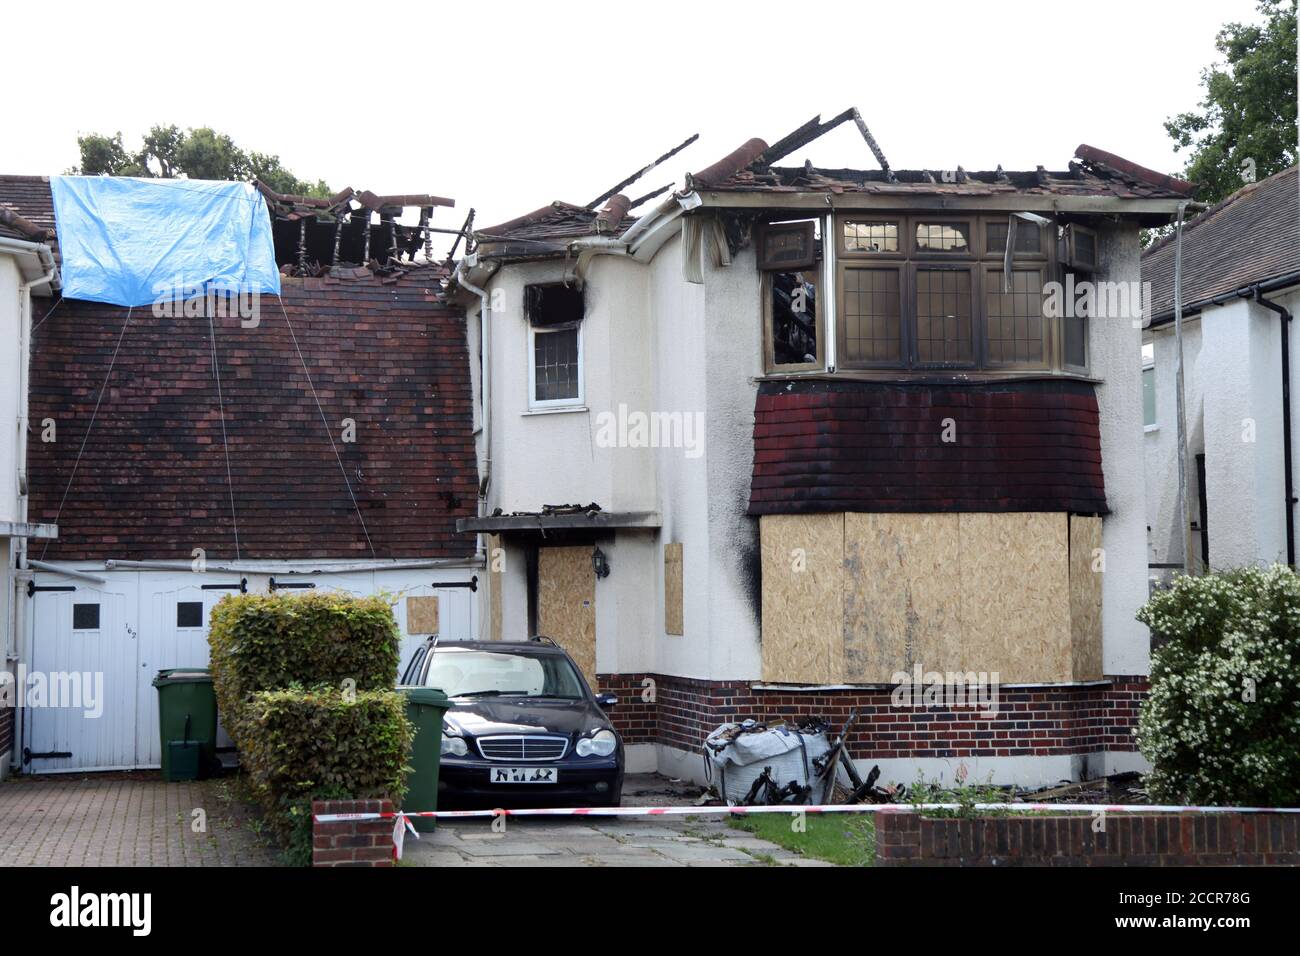 Burnt out fire damaged shell of semi detached house on Craddocks Avenue, House fire occurred 14 August 2020, Ashtead, Surrey, England, UK Stock Photo